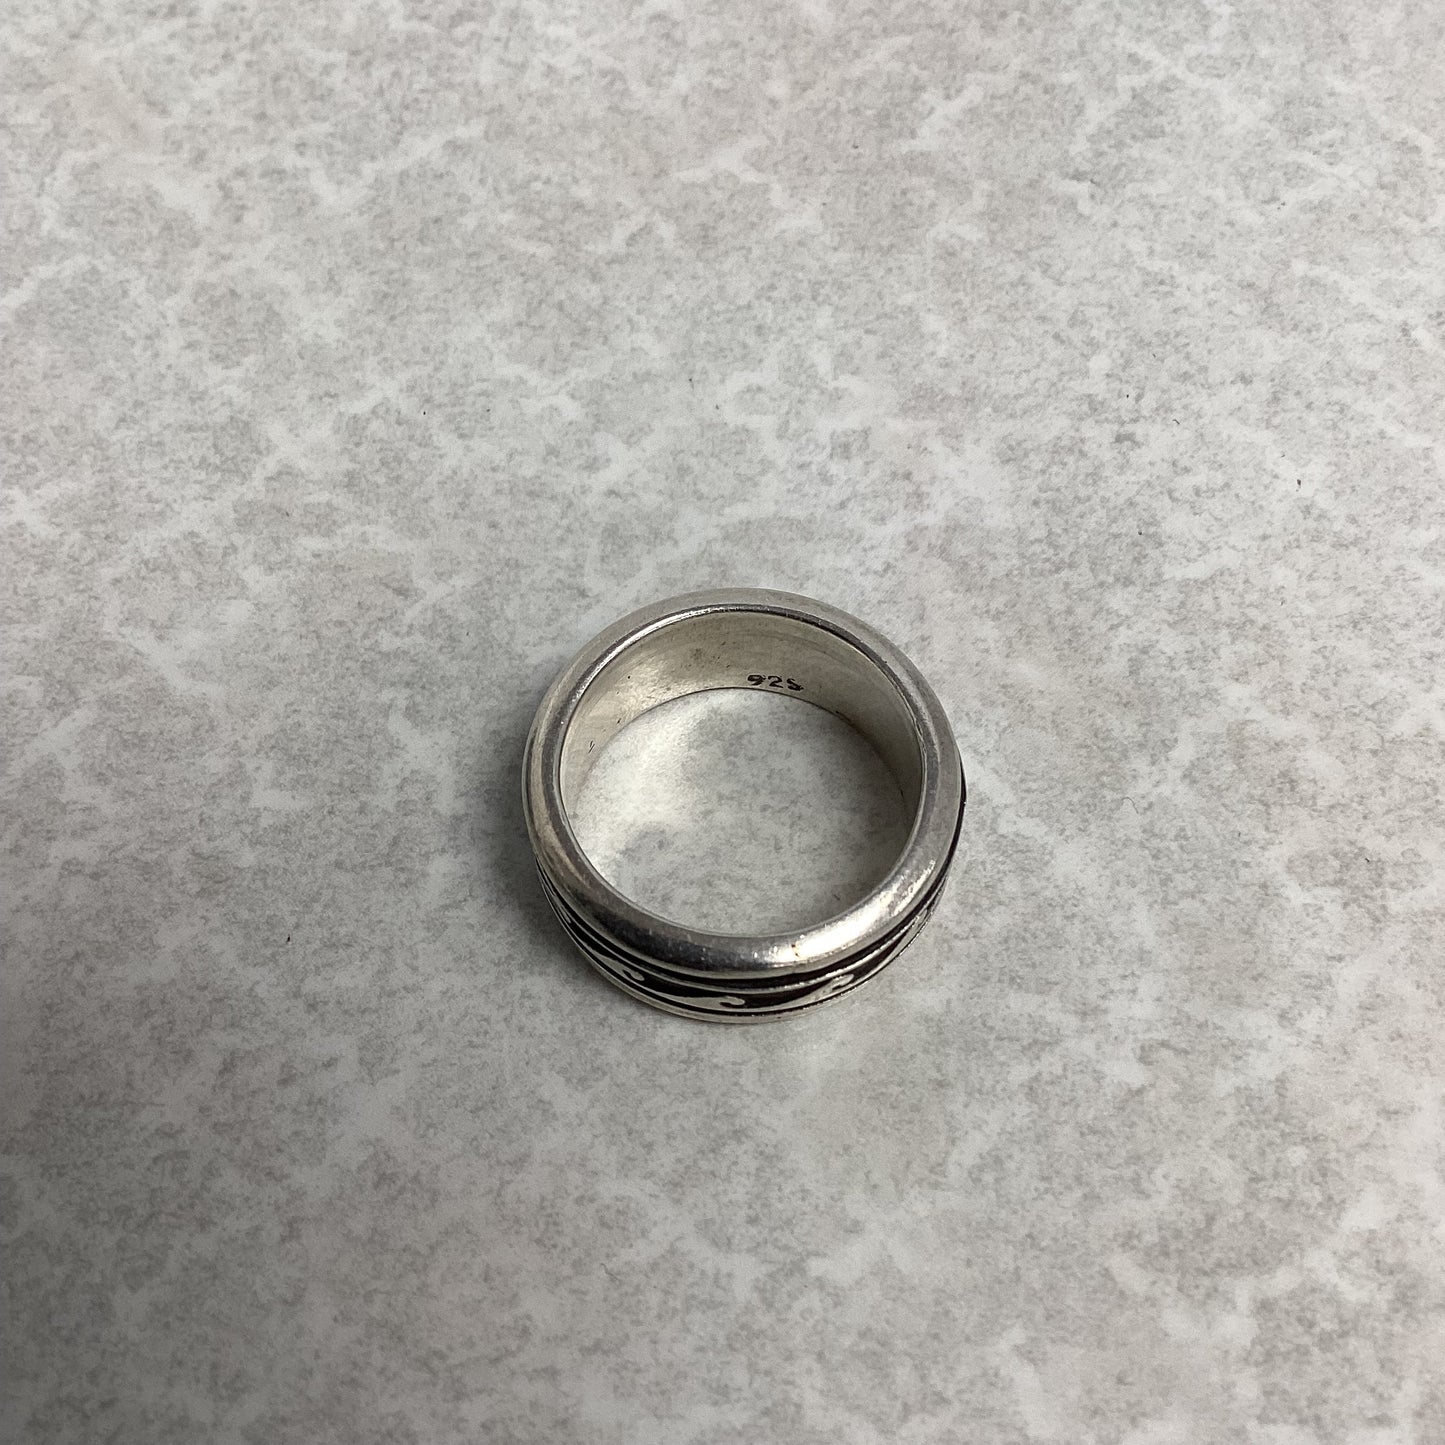 Ring Sterling Silver Cmc, Size 6.5